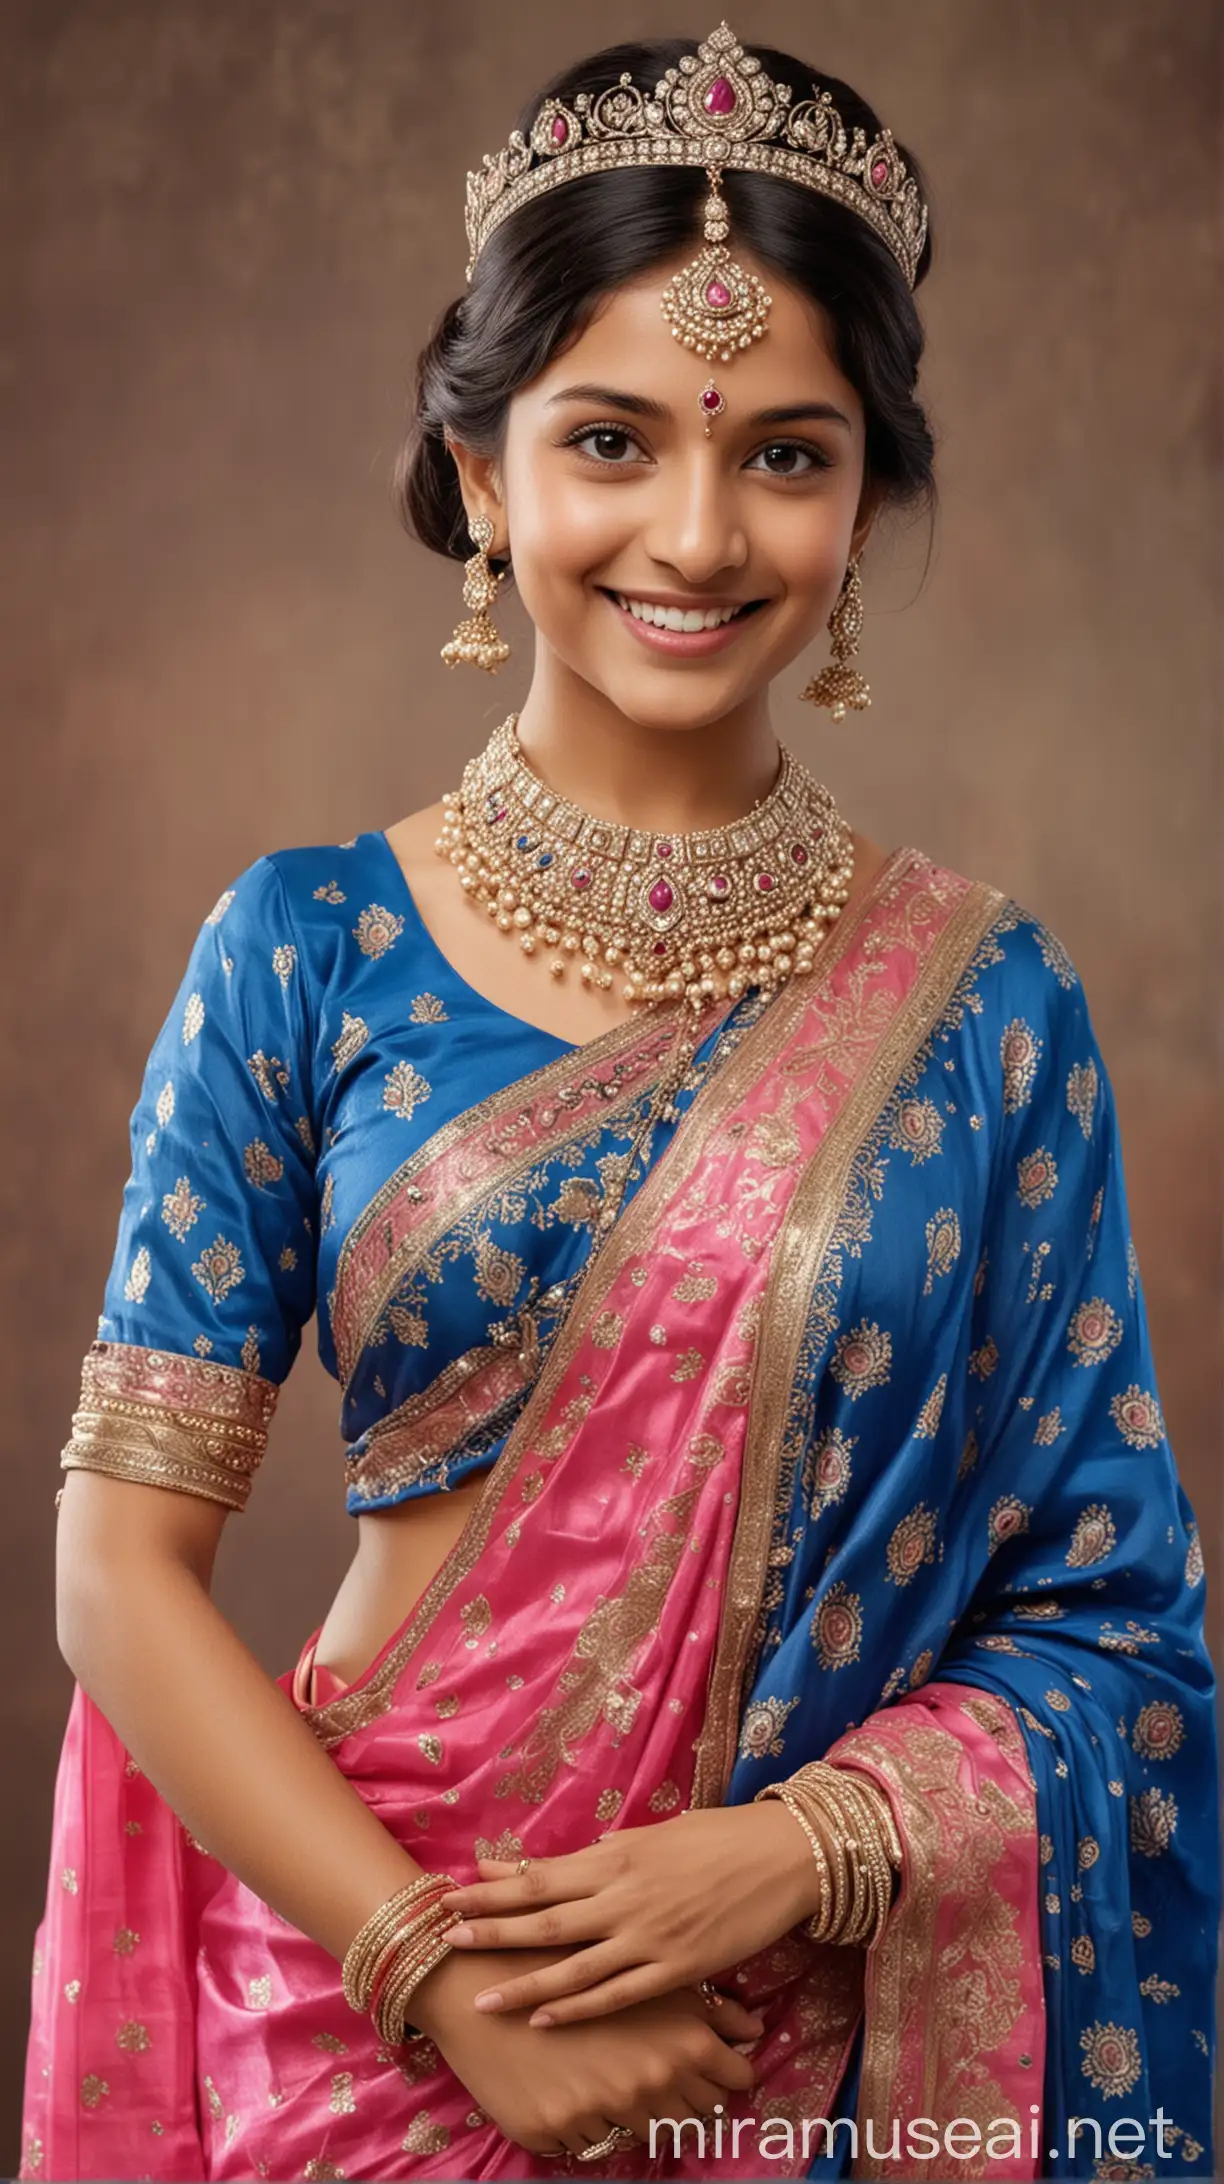 smiling Indian princess in blue and pink saree with ornaments , wearing crown and , picture shows head to hip